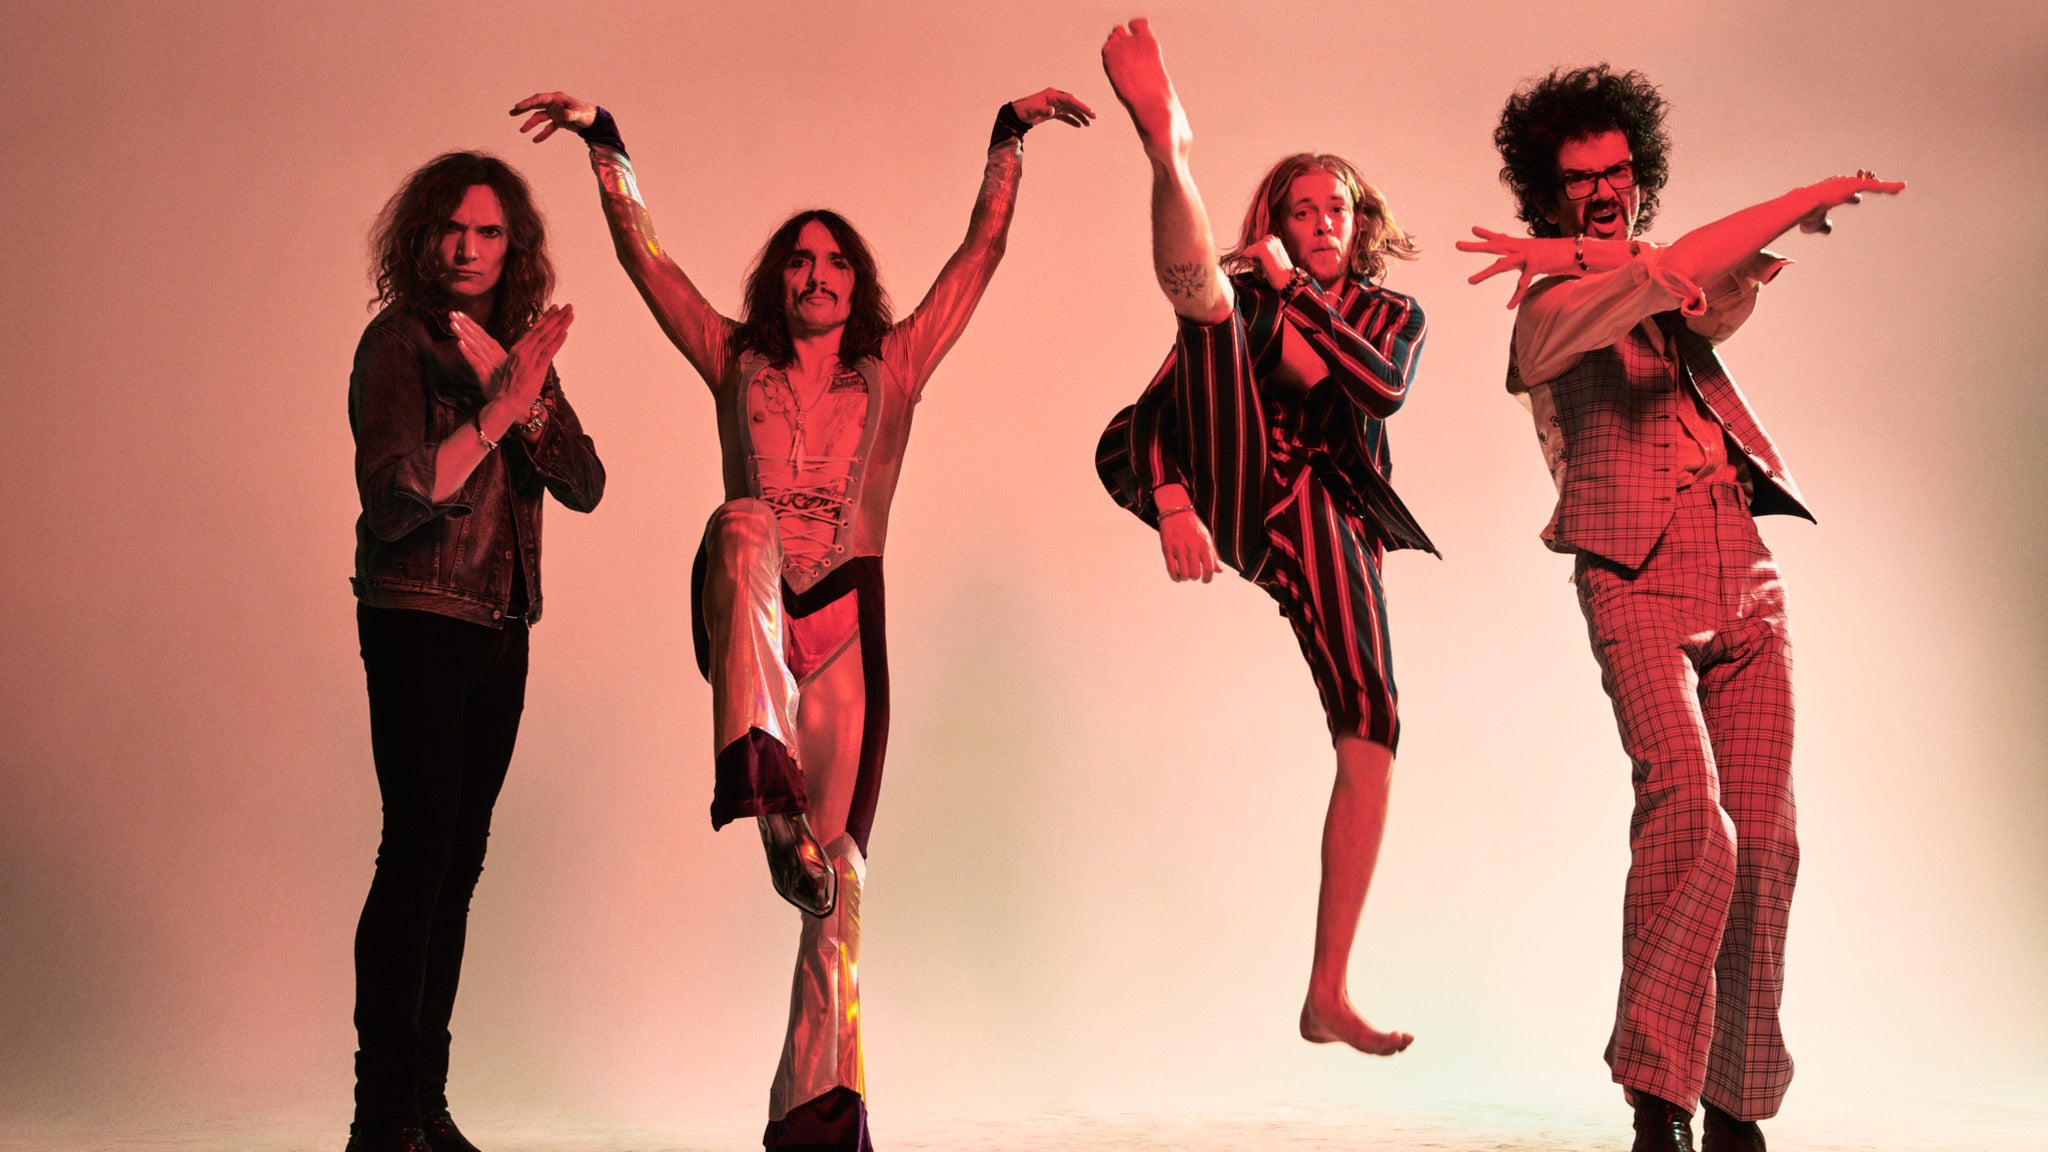 Image used with permission from Ticketmaster | The Darkness tickets